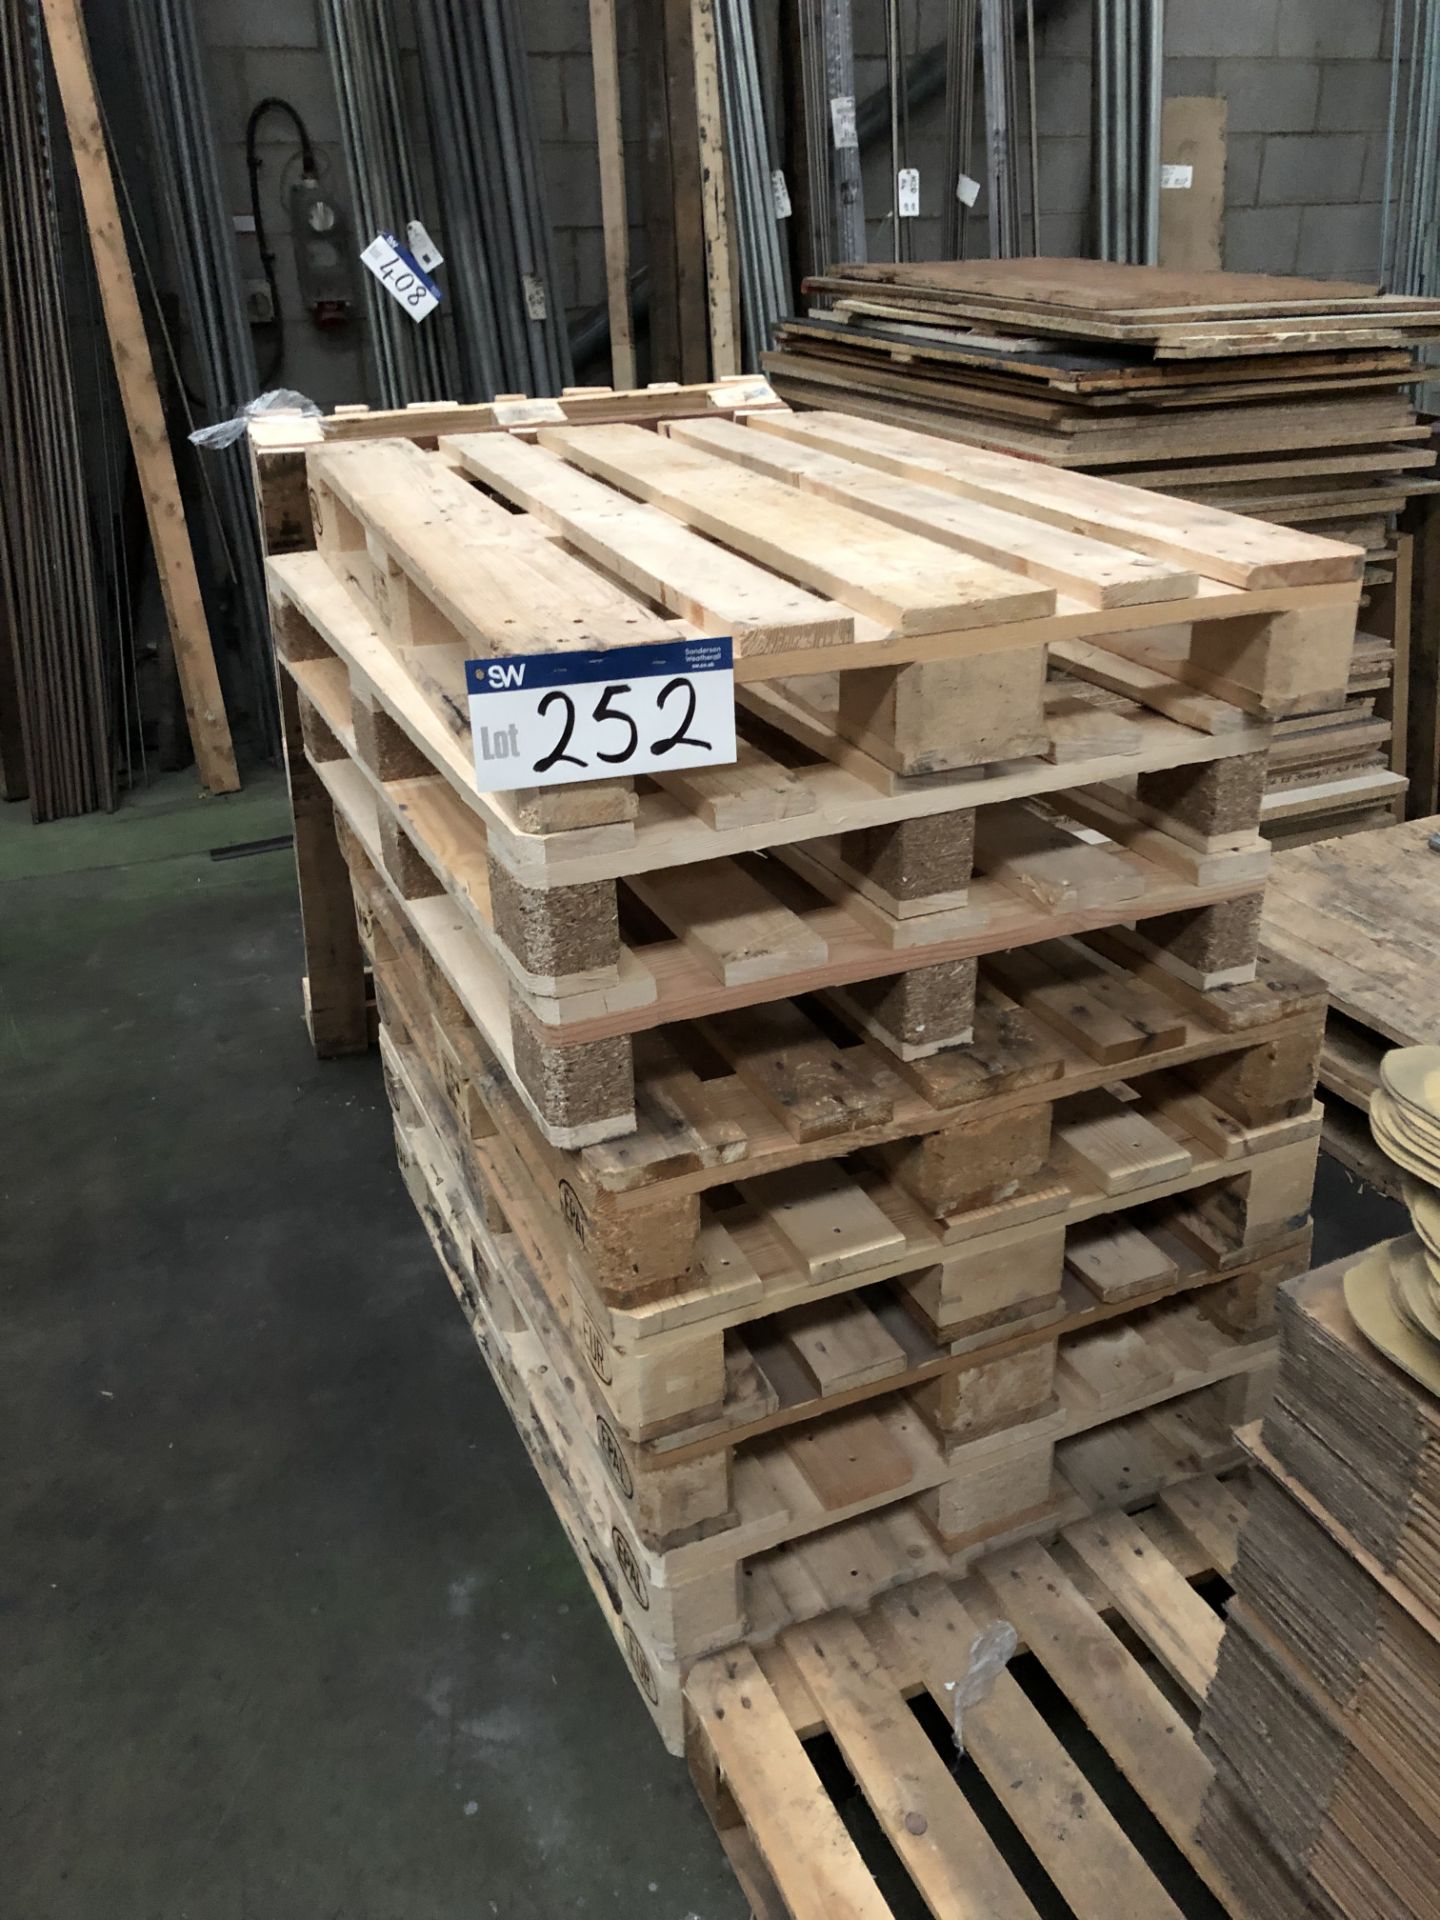 9 Wooden Pallets, 1200 x 800mm, 2 Wooden Pallets, 1900 x 800mm and Chipboard Sheets